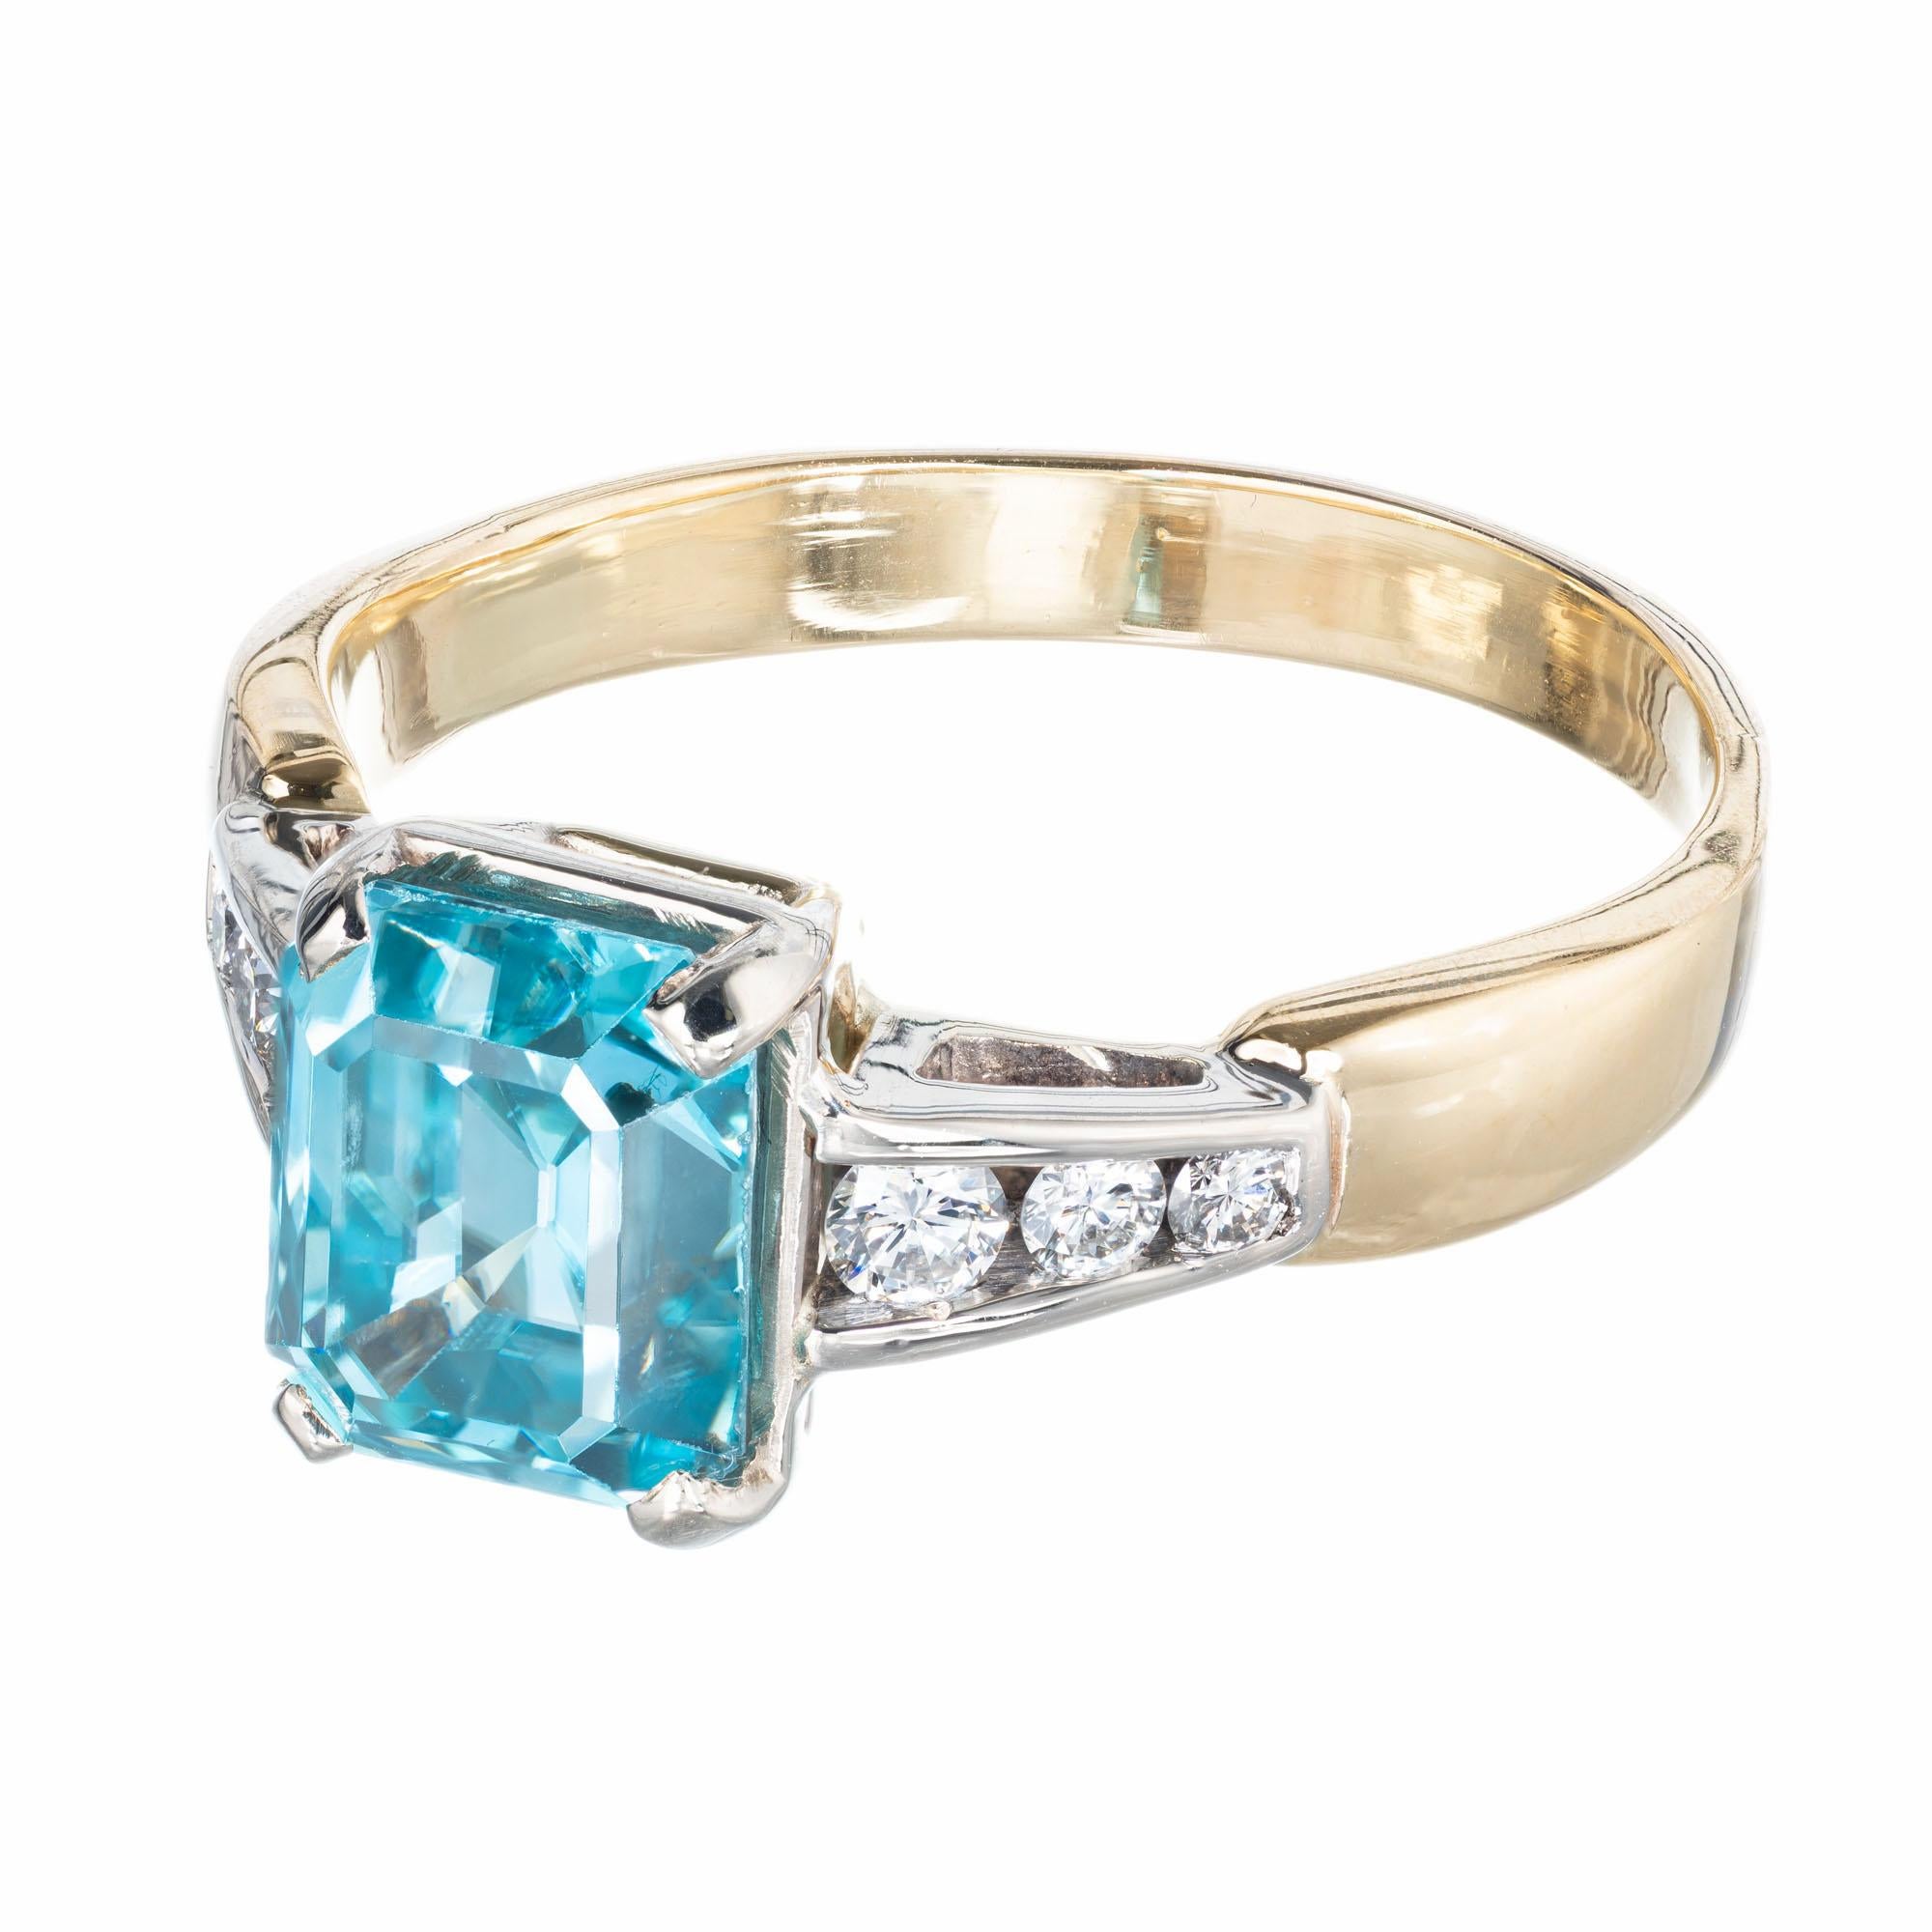 Vintage 1960's 3.70 carat emerald cut blue zircon and diamond engagement ring in a 14k yellow and white gold setting.  

1 emerald cut blue zircon, approx. 3.7cts
6 round brilliant cut diamonds, H-I VS-SI, approx. .22cts
Size 9 and sizable
14k